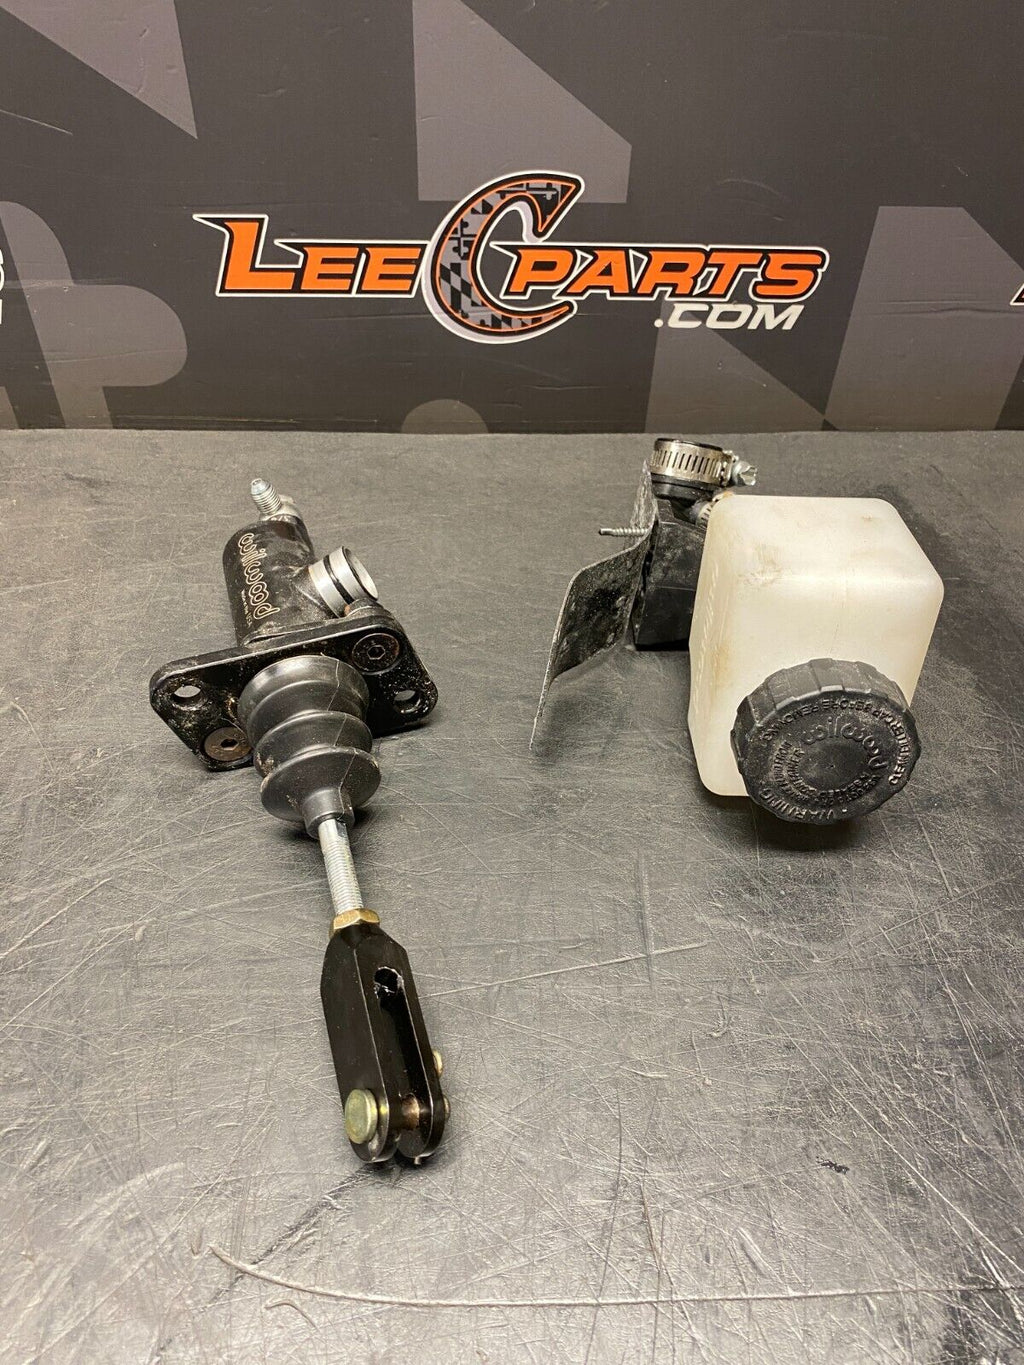 1998 NISSAN 240SX WILWOOD 7/8 CLUTCH MASTER CYLINDER WITH RESEVOIR ADAPTOR USED